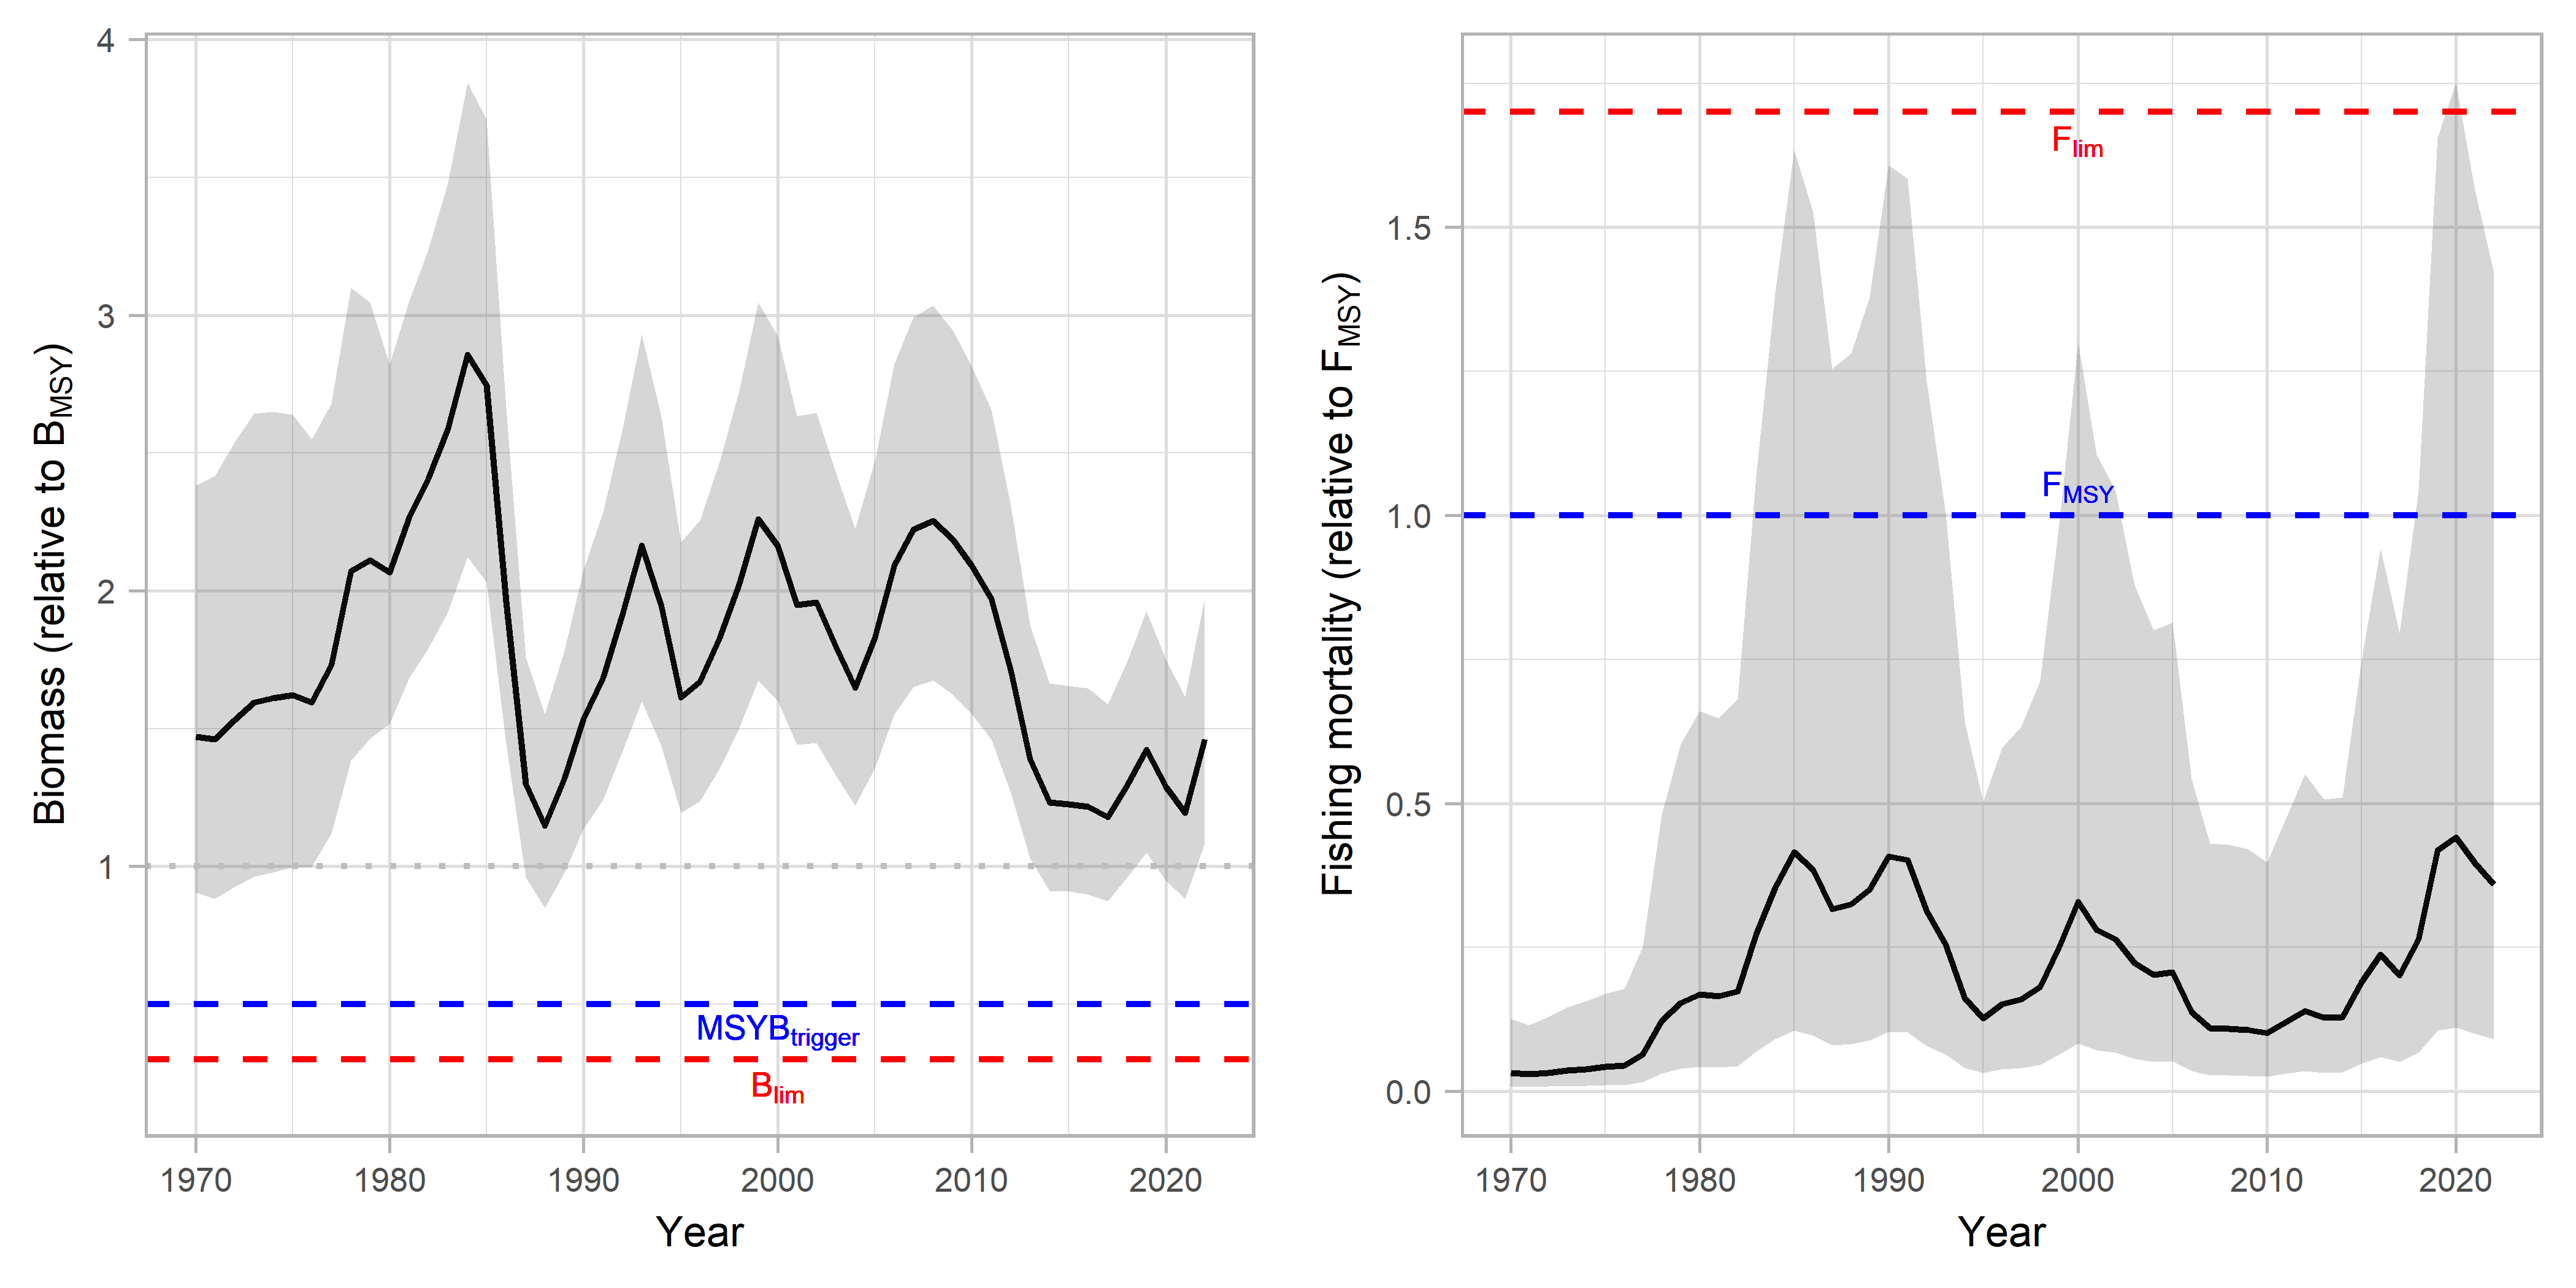 Model estimated stock sixe and fishing mortality